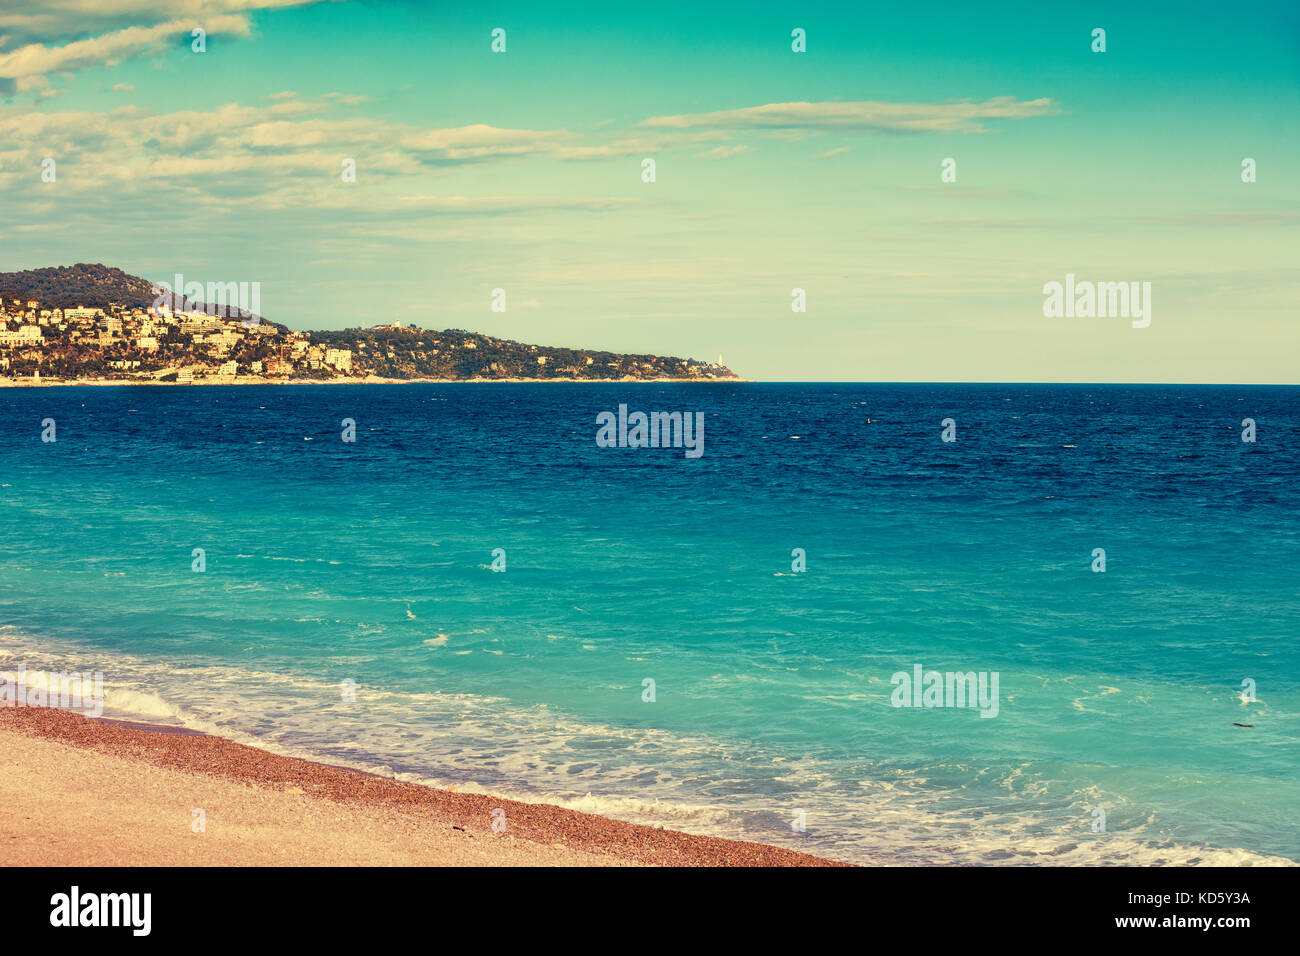 Cote d'Azur. French Riviera, Nice, France Stock Photo